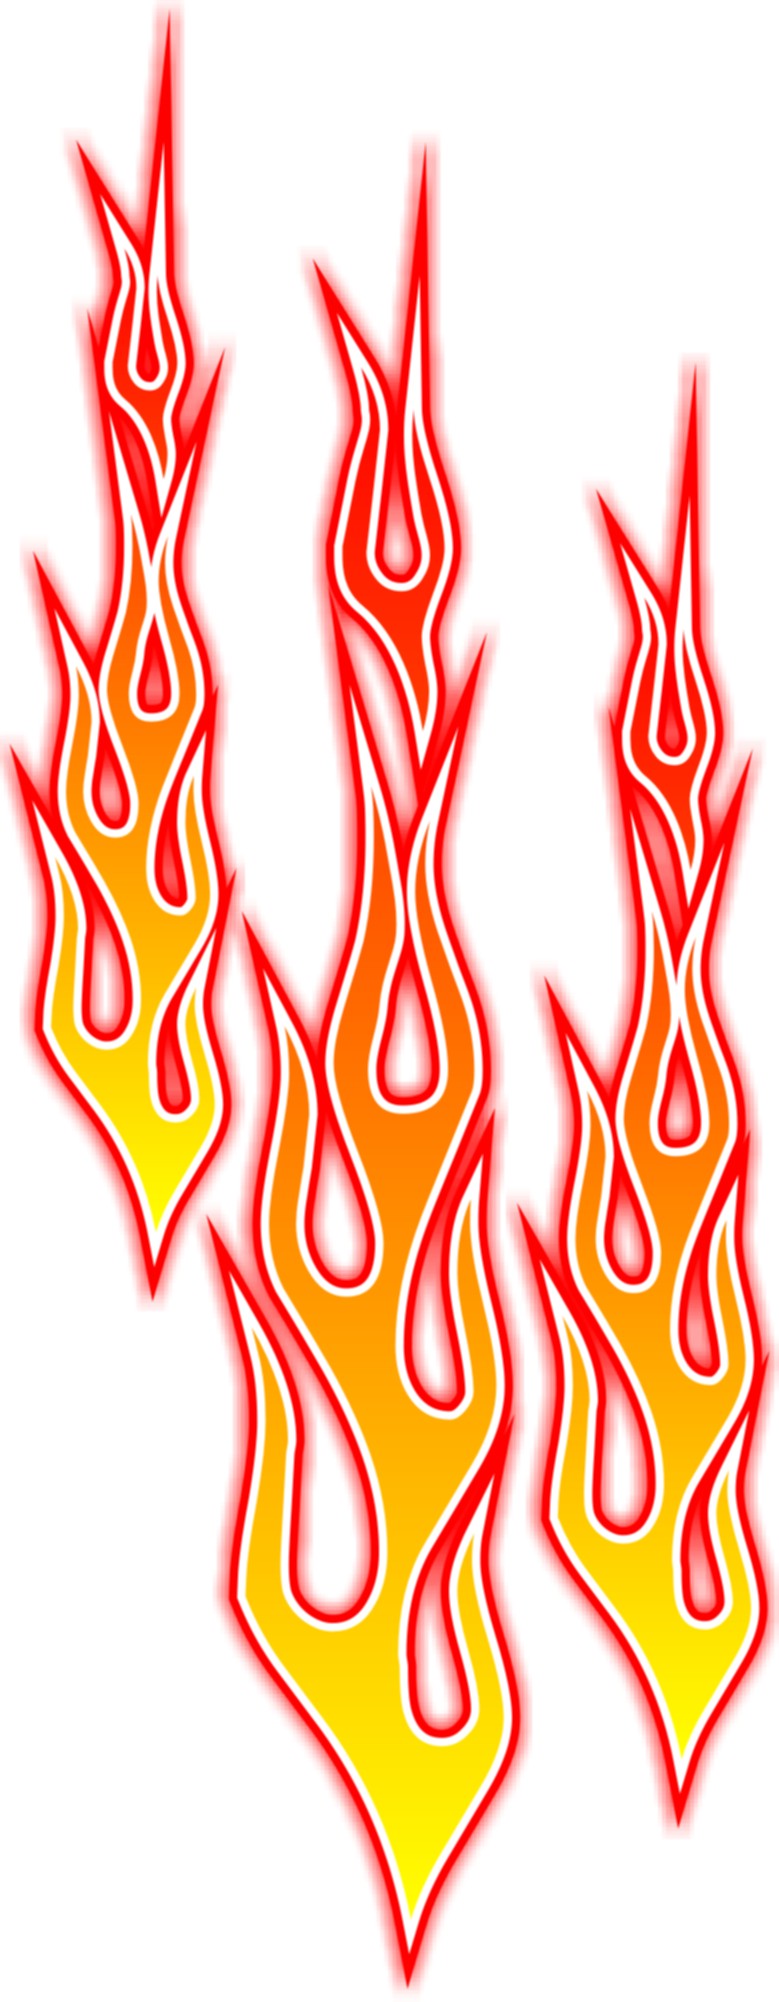 Fire 3   Free Images At Clker Com   Vector Clip Art Online Royalty    